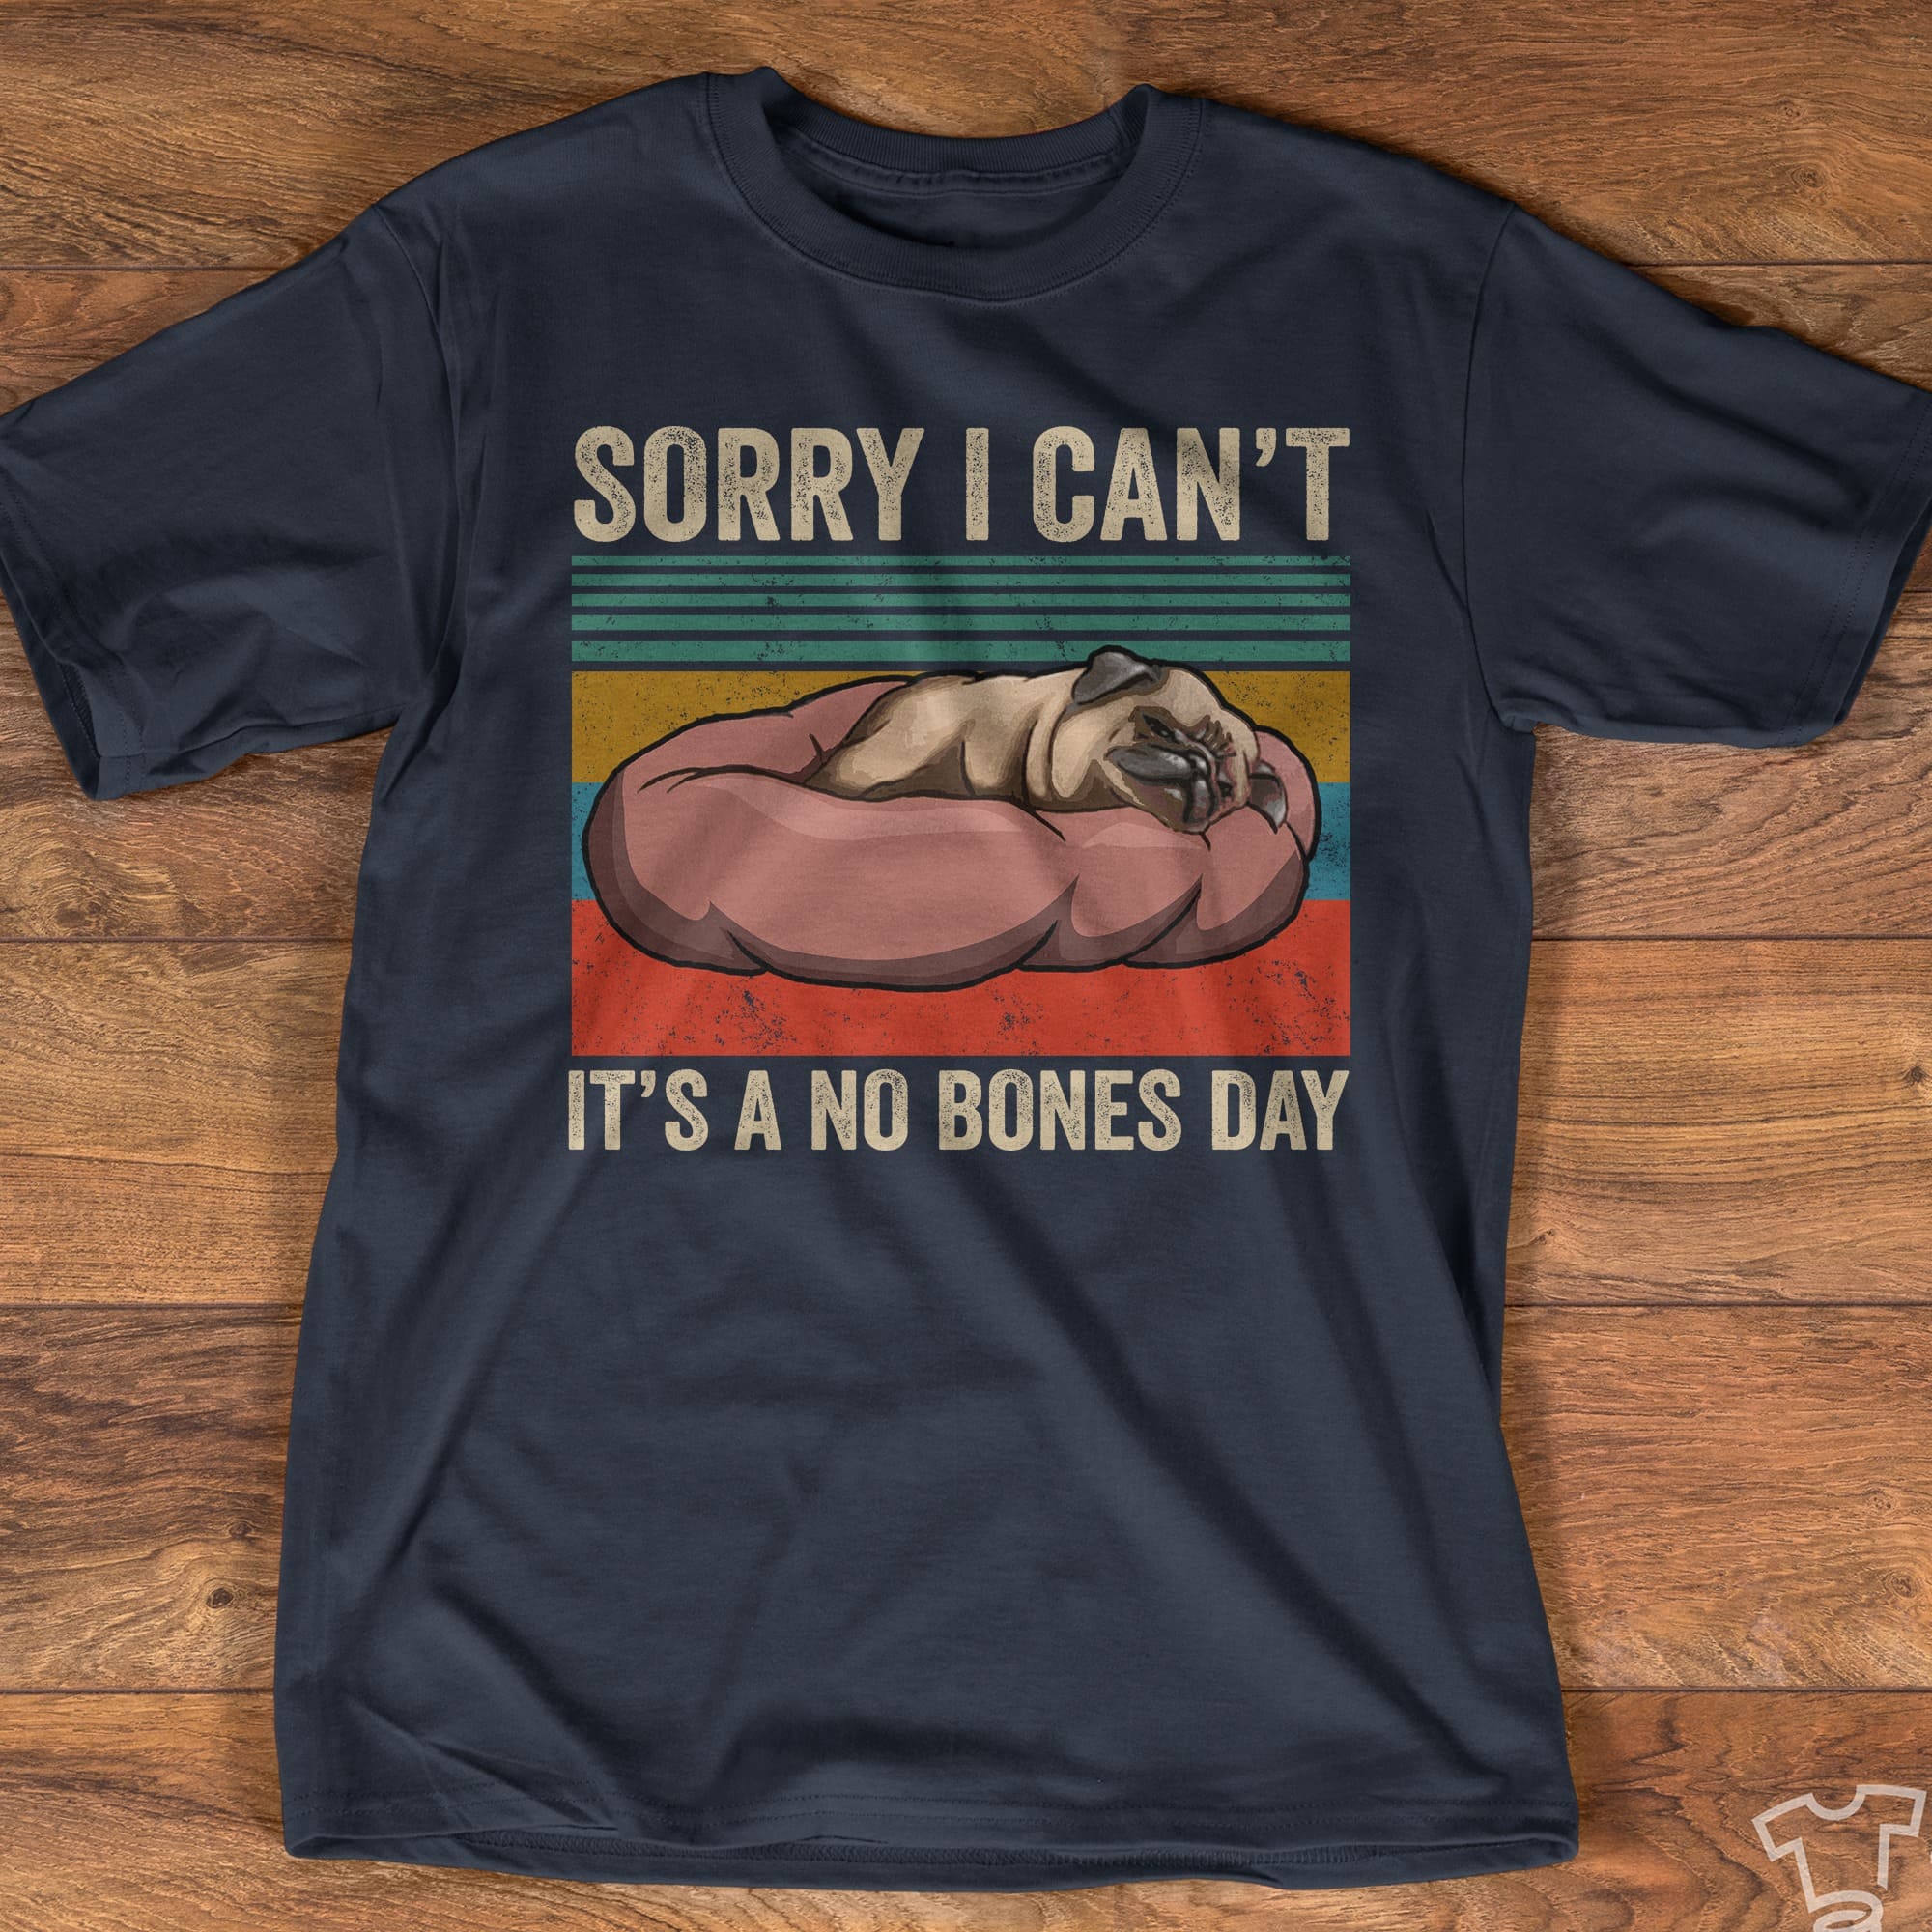 Sorry I can't It's a no bones day - Sleeping pug dog, T-shirt for pug owners